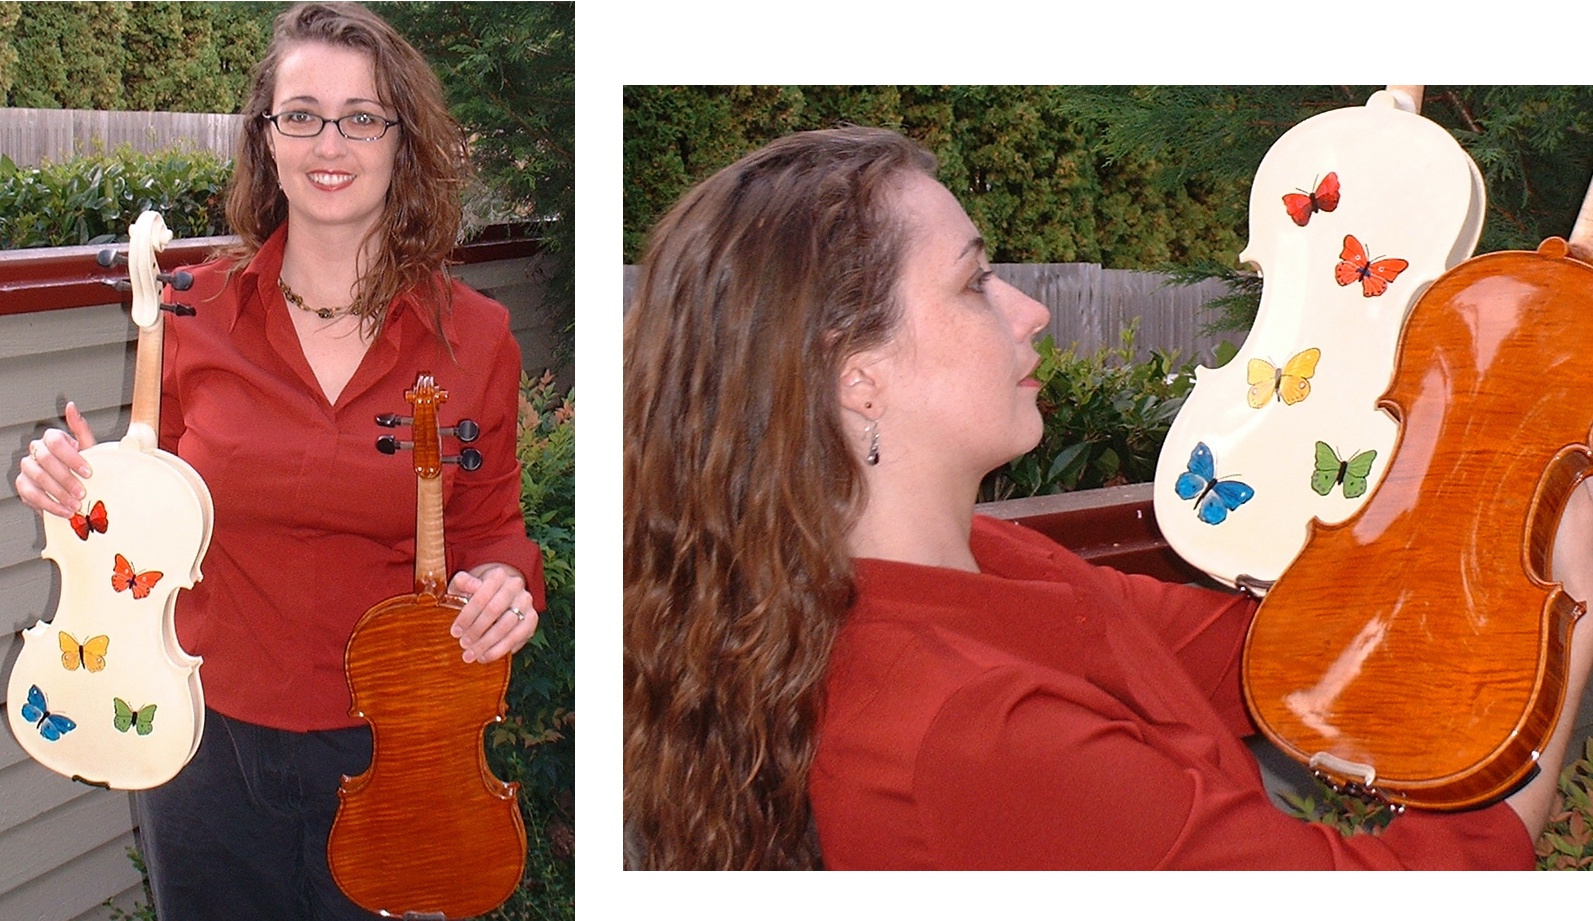 Violin in burgundy shirt and glasses holding two violins